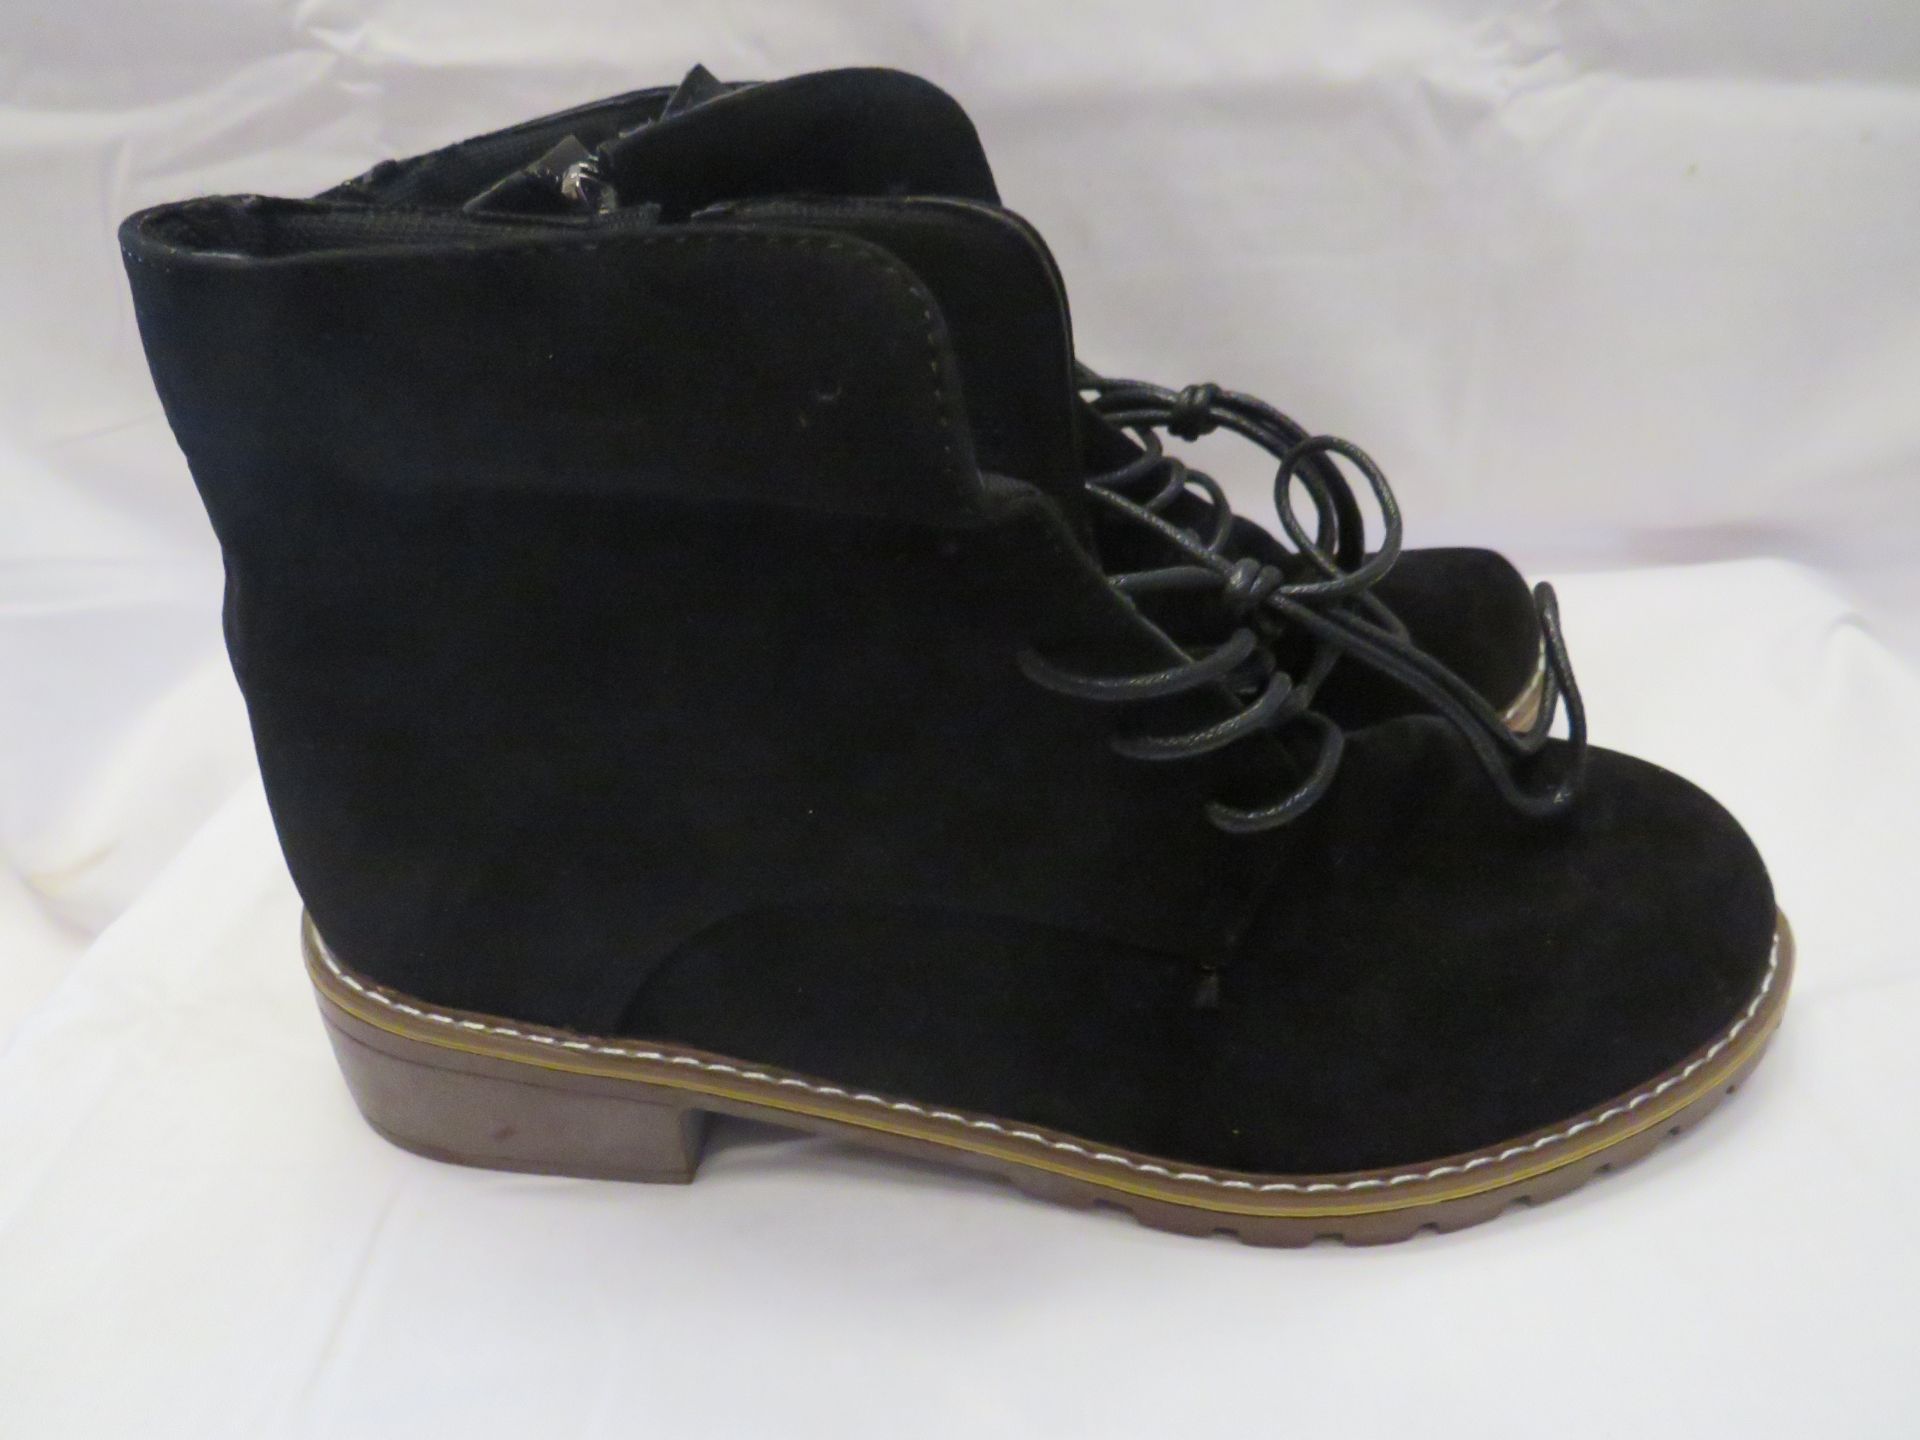 Ladies Flat Suede Ankle Boot Black Size 37 New